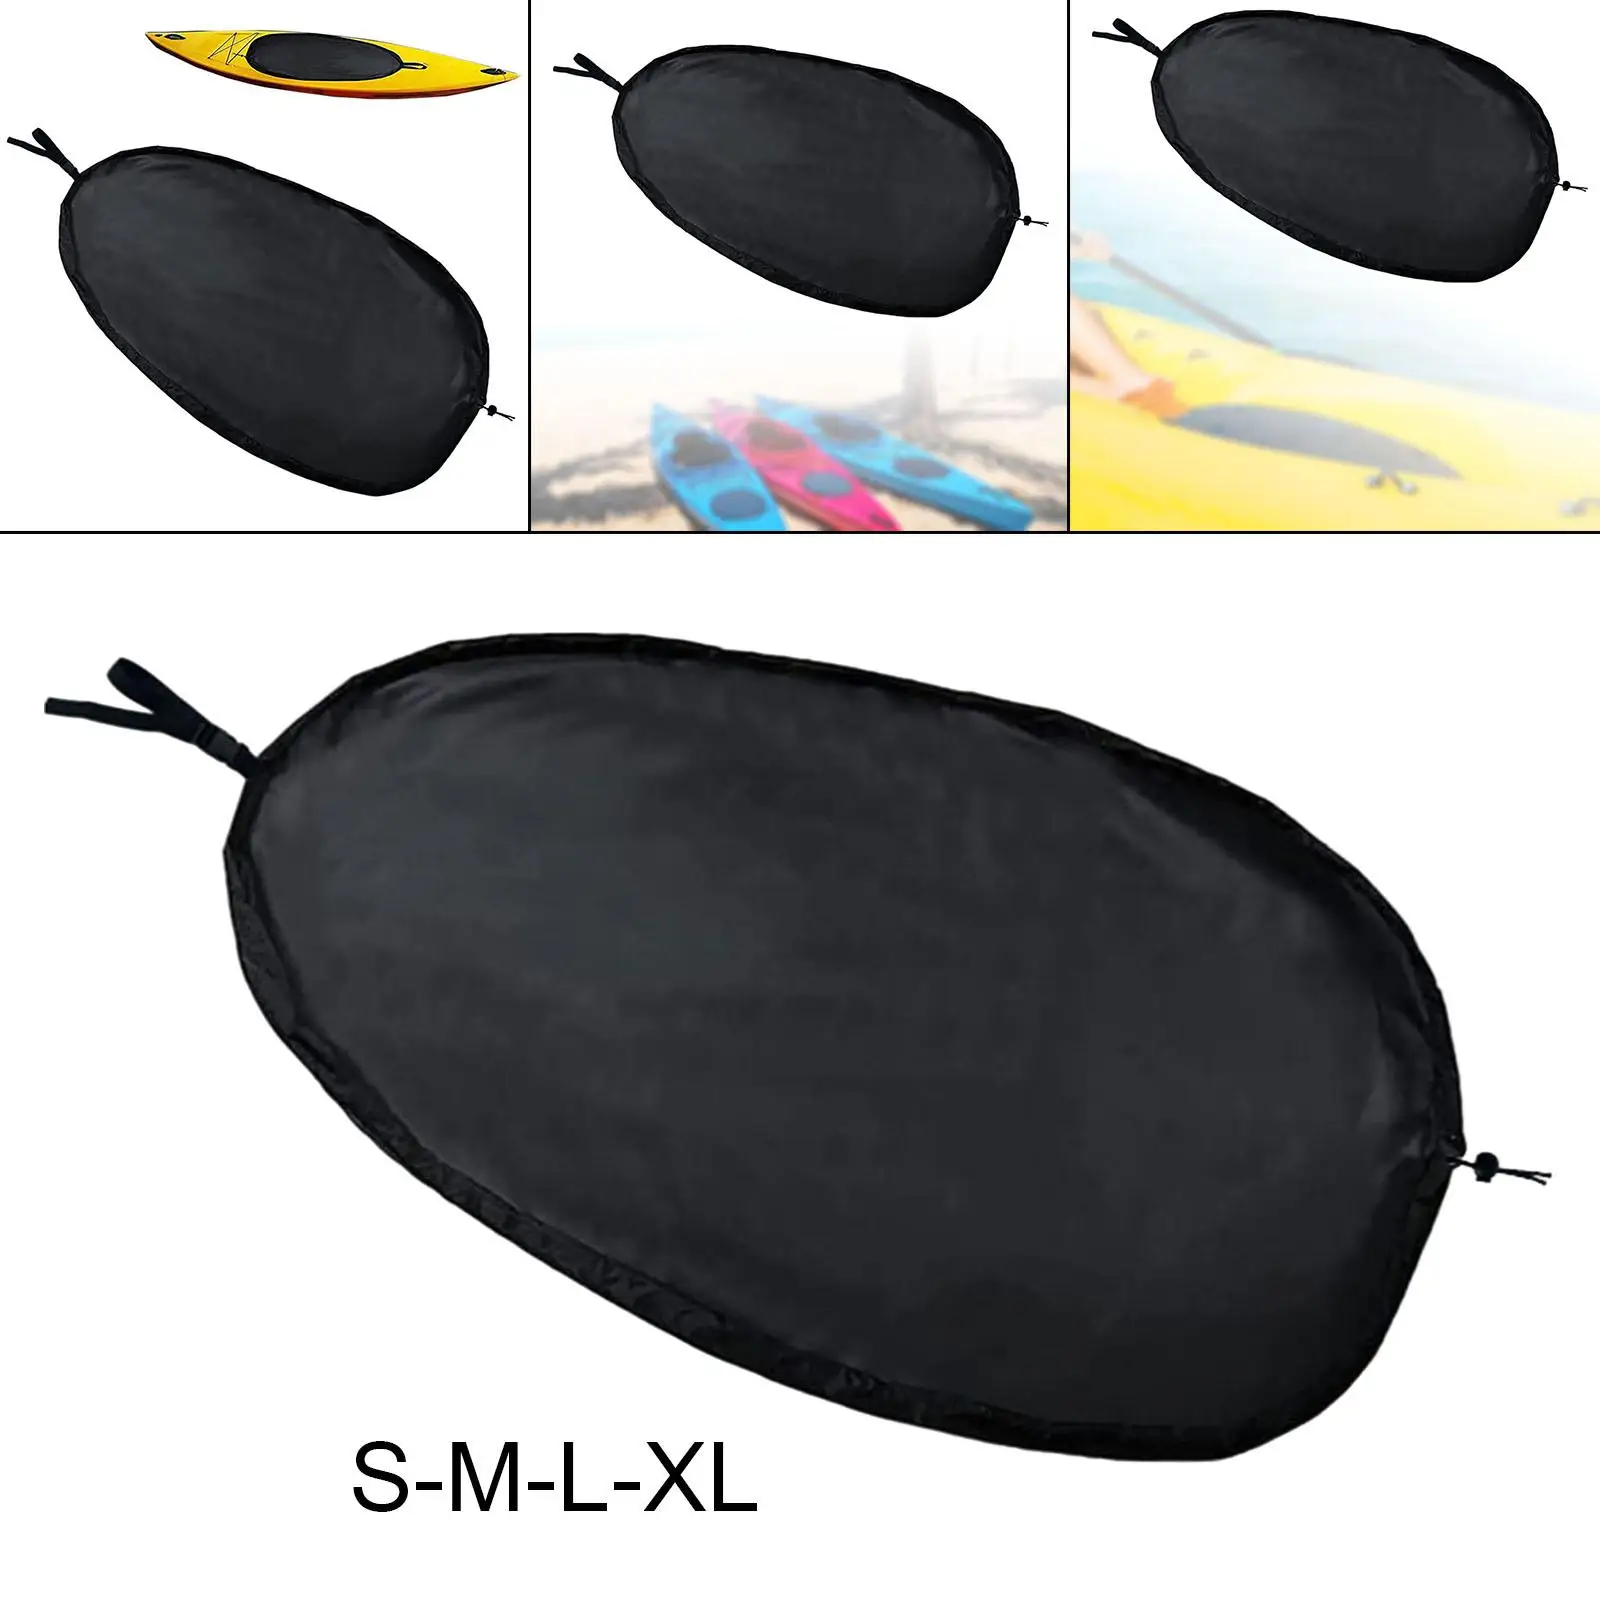 Portable Kayak Cockpit Cover Waterproof Breathable Adjustable Sun Protection Durable Dust Proof Cover for Outdoor Boat